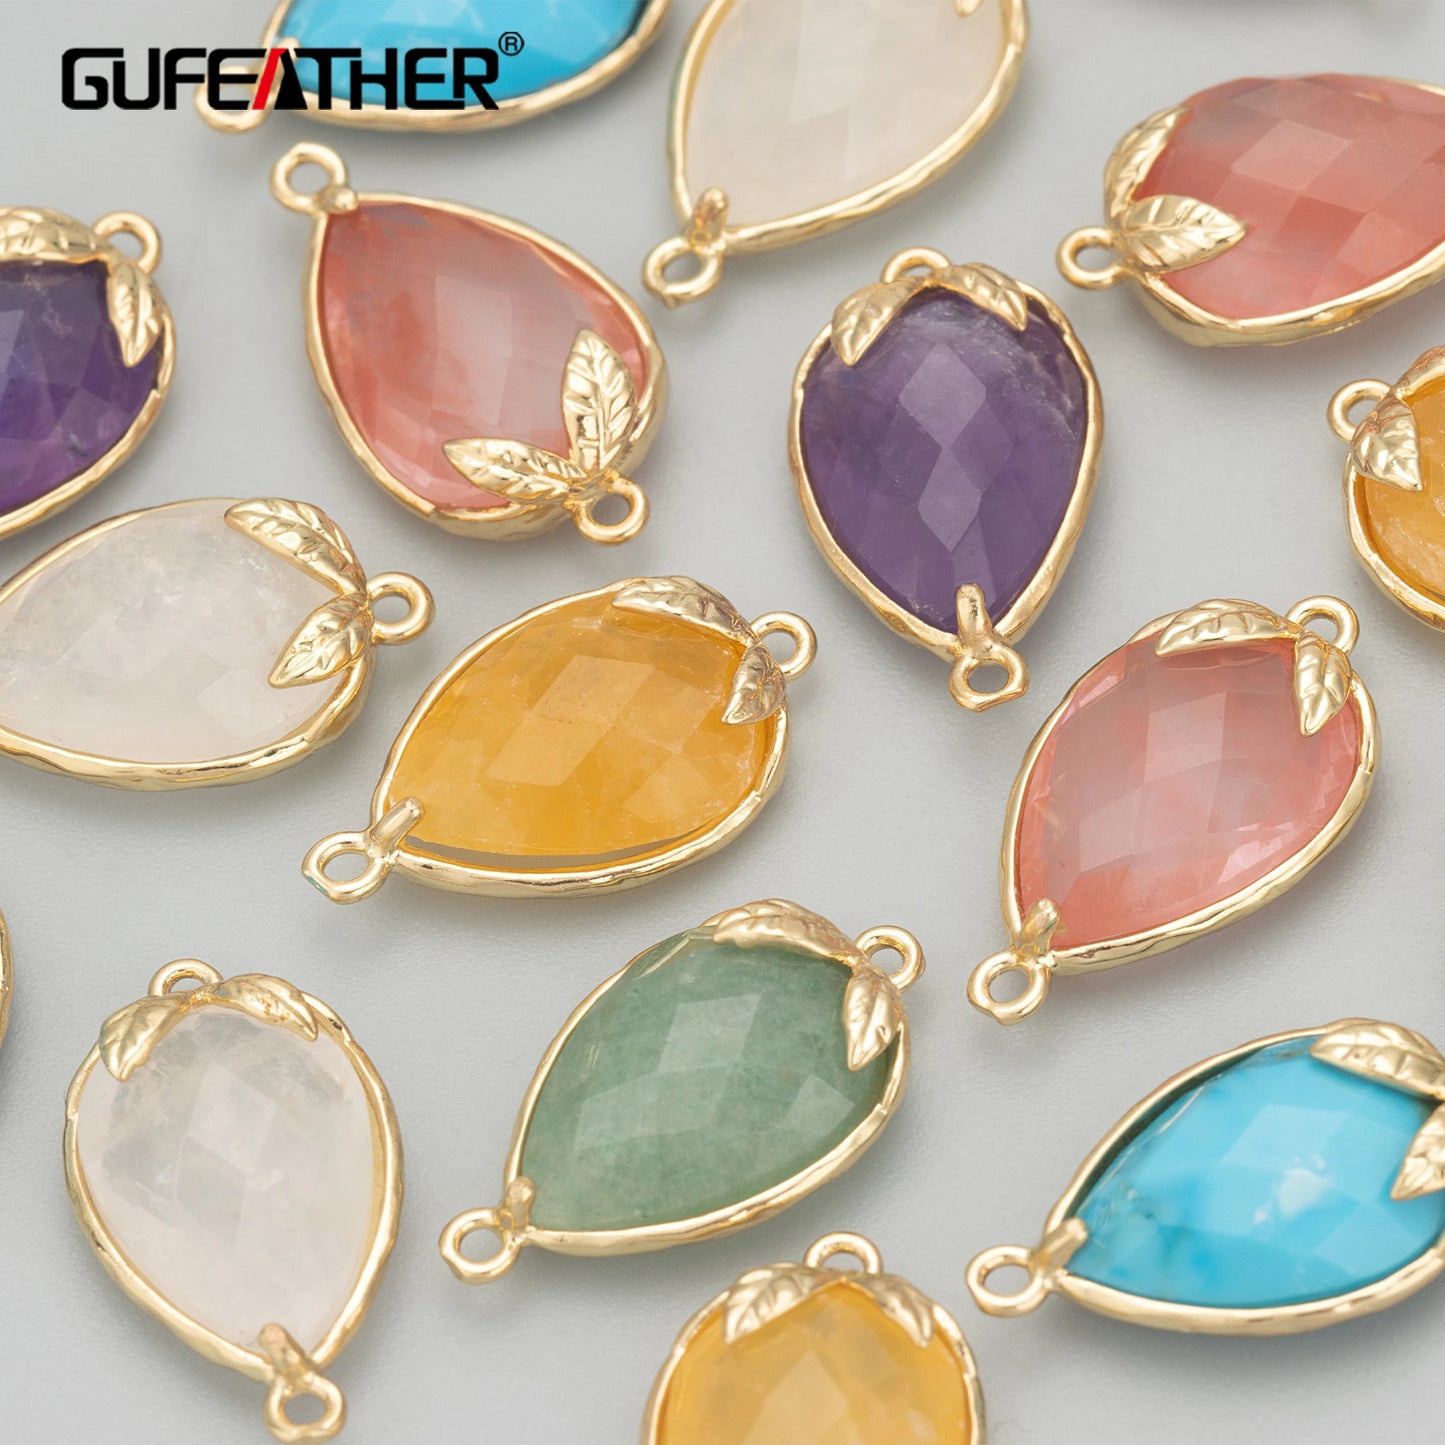 GUFEATHER MD04,jewelry accessories,nickel free,18k gold plated,copper,natural stone,charms,diy pendants,jewelry making,4pcs/lot